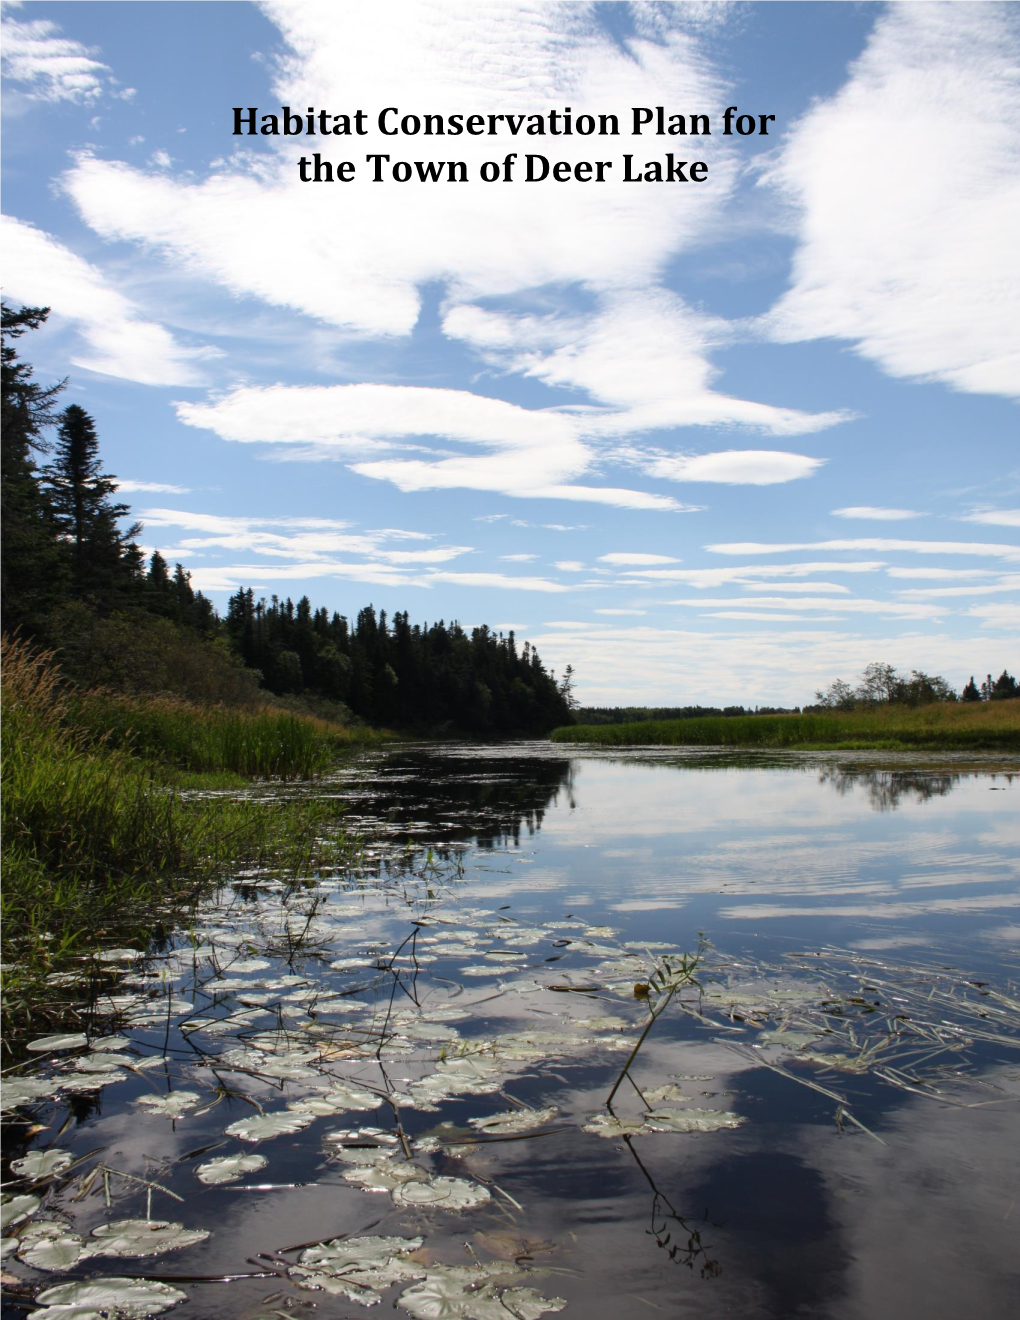 Habitat Conservation Plan for the Town of Deer Lake